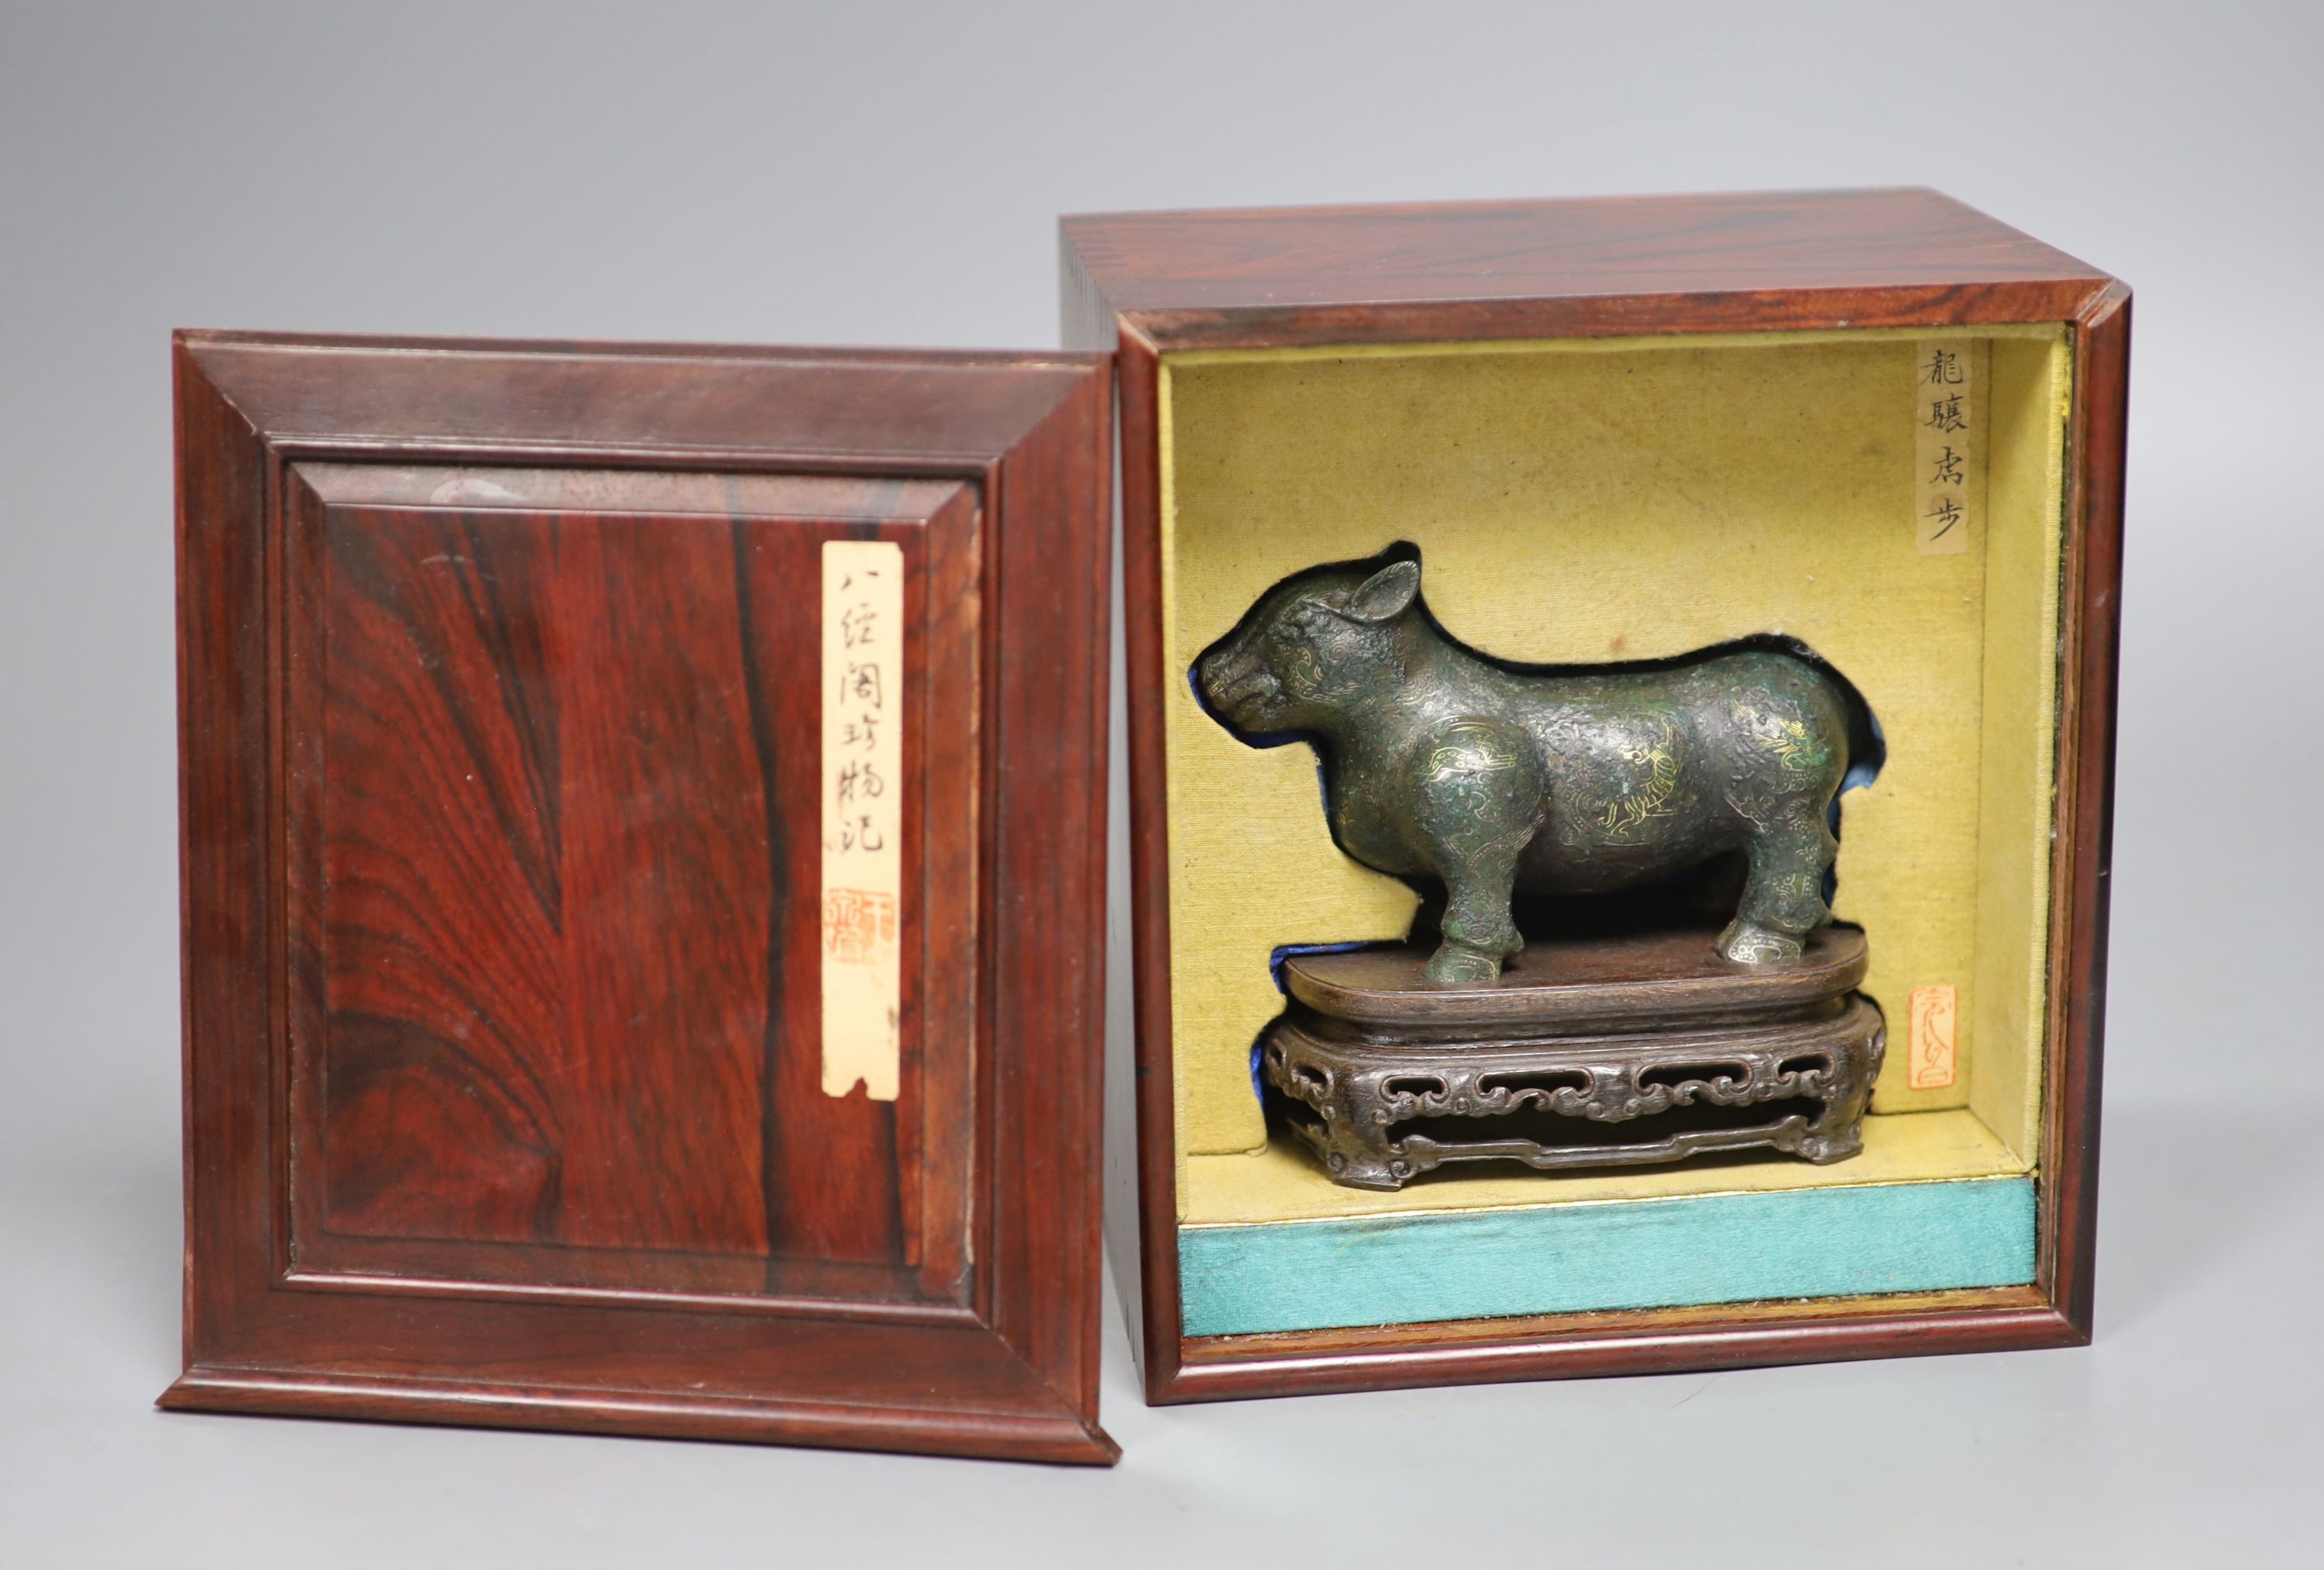 A Chinese gold and silver inlaid bronze figure of a tapir, Han dynasty or later, L. 12cm,